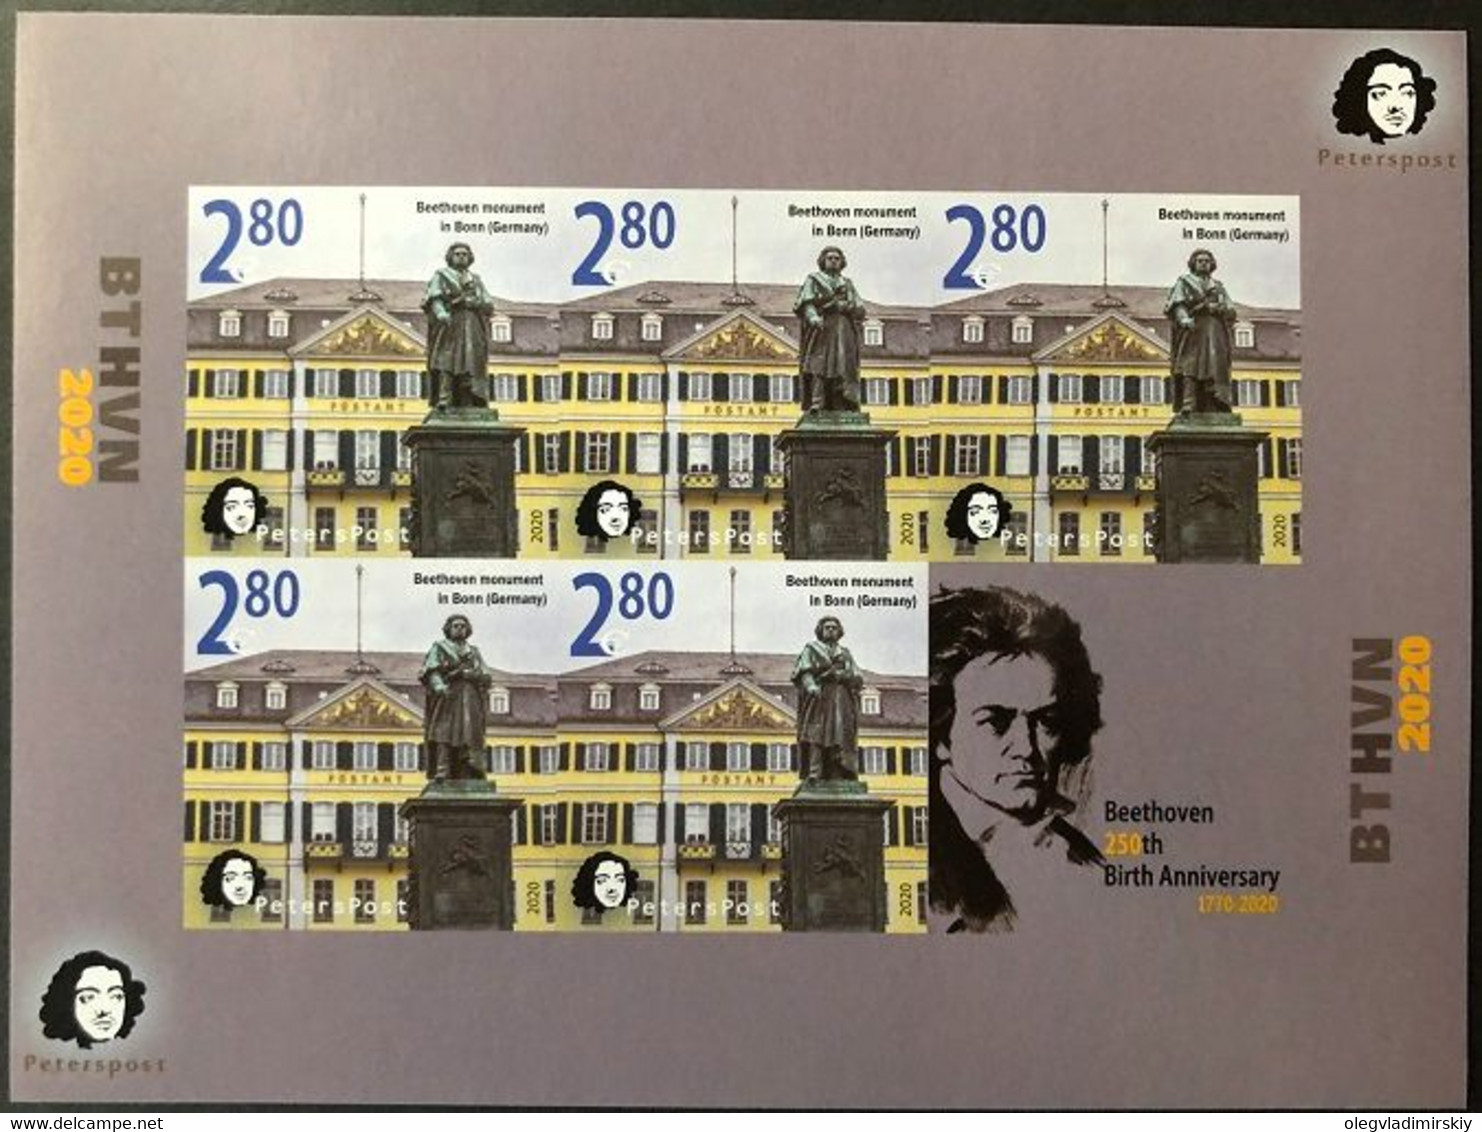 Finland 2020 BTHVN 250 Ann Monument In Bonn (Germany) Peterspost Sheetlet Of 5 Imperforated Stamps And Label Rare - Neufs